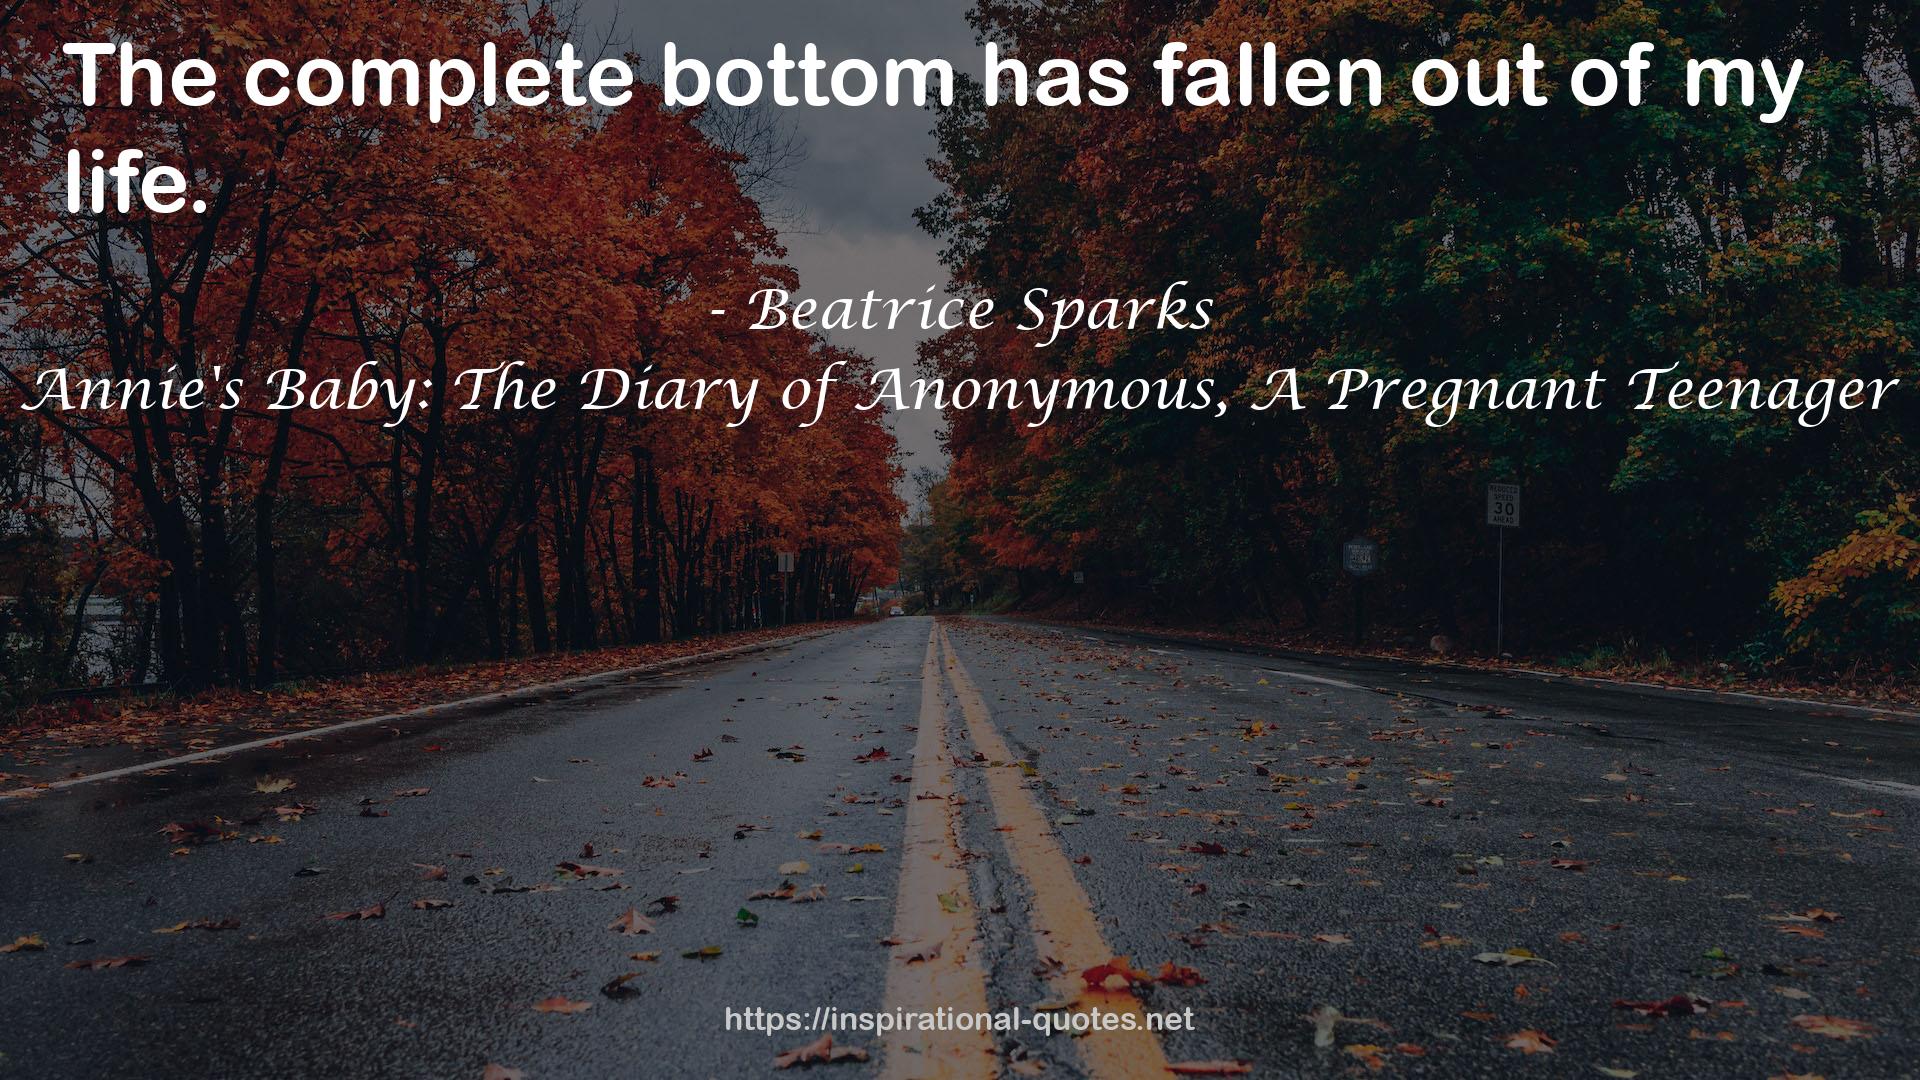 Annie's Baby: The Diary of Anonymous, A Pregnant Teenager QUOTES